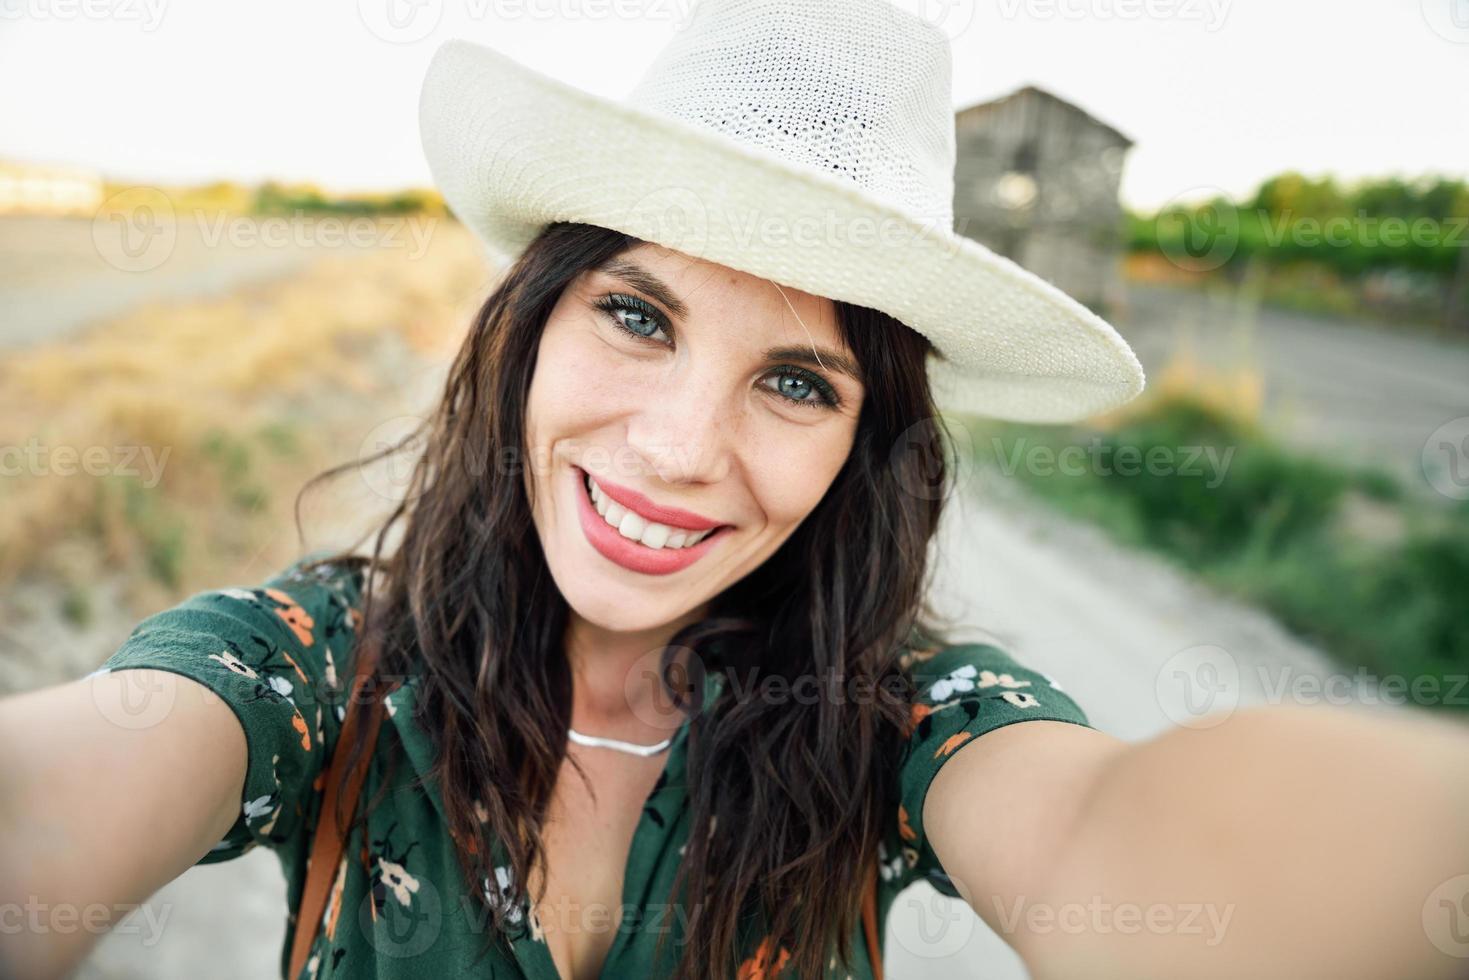 Hiker young woman taking a selfie photograph outdoors photo